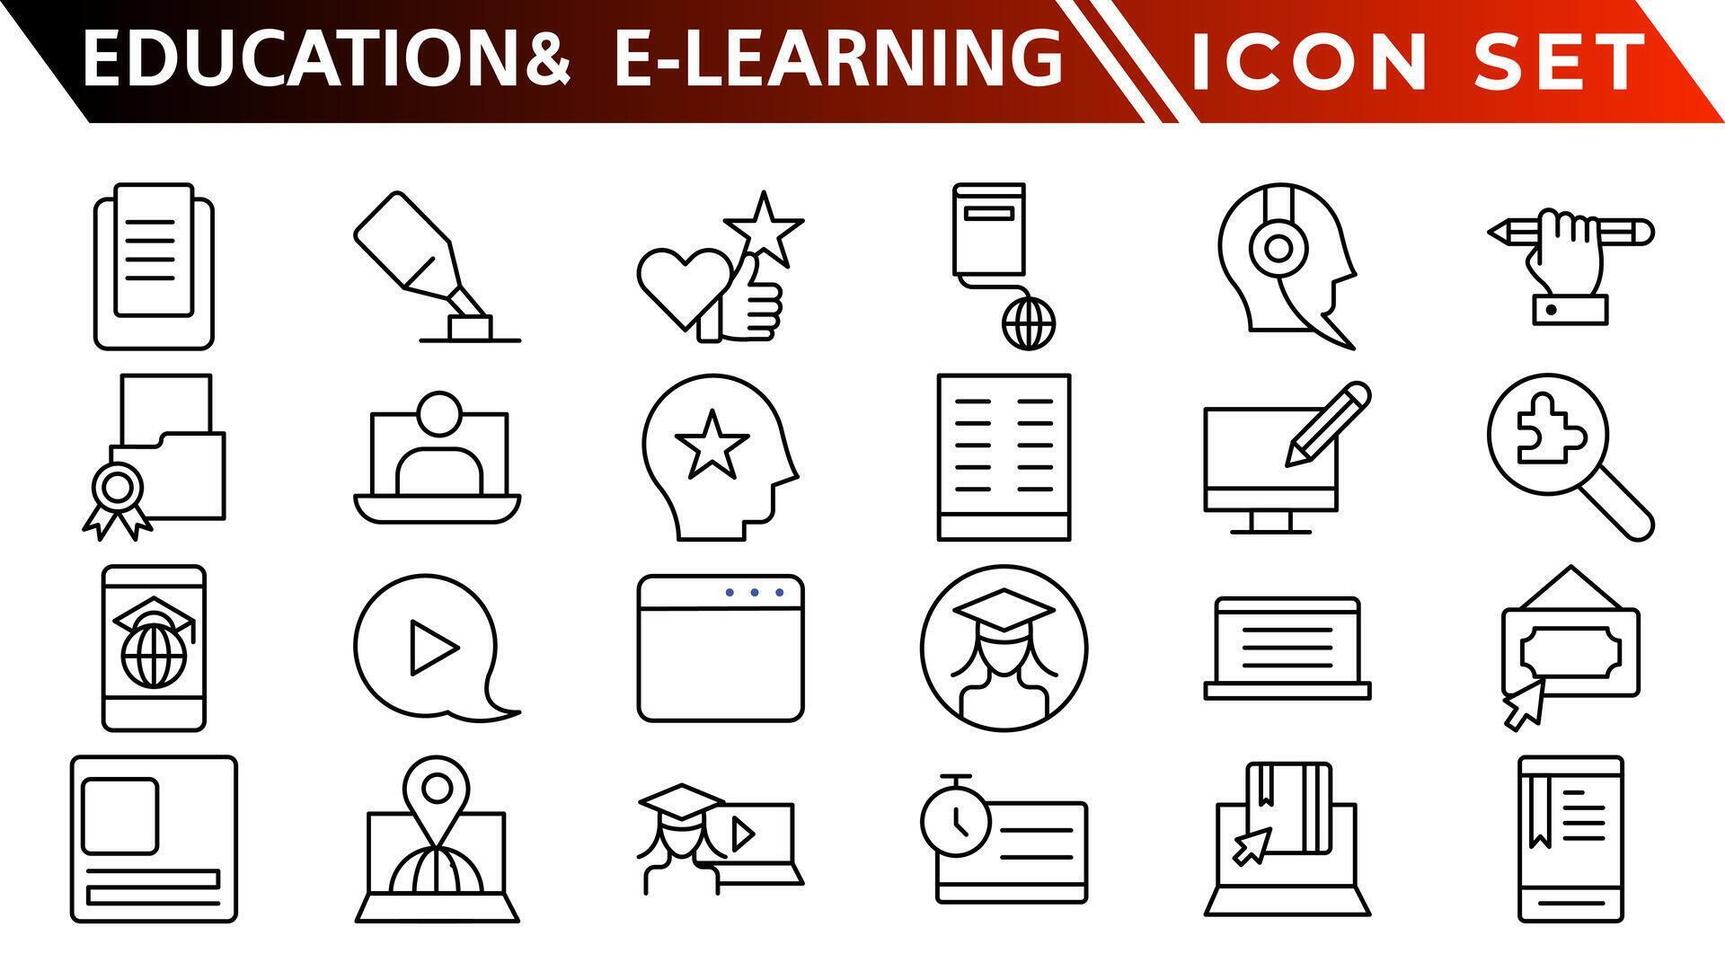 30Education and E-Learning web icons in line style. School, university, textbook, learning. Vector illustration